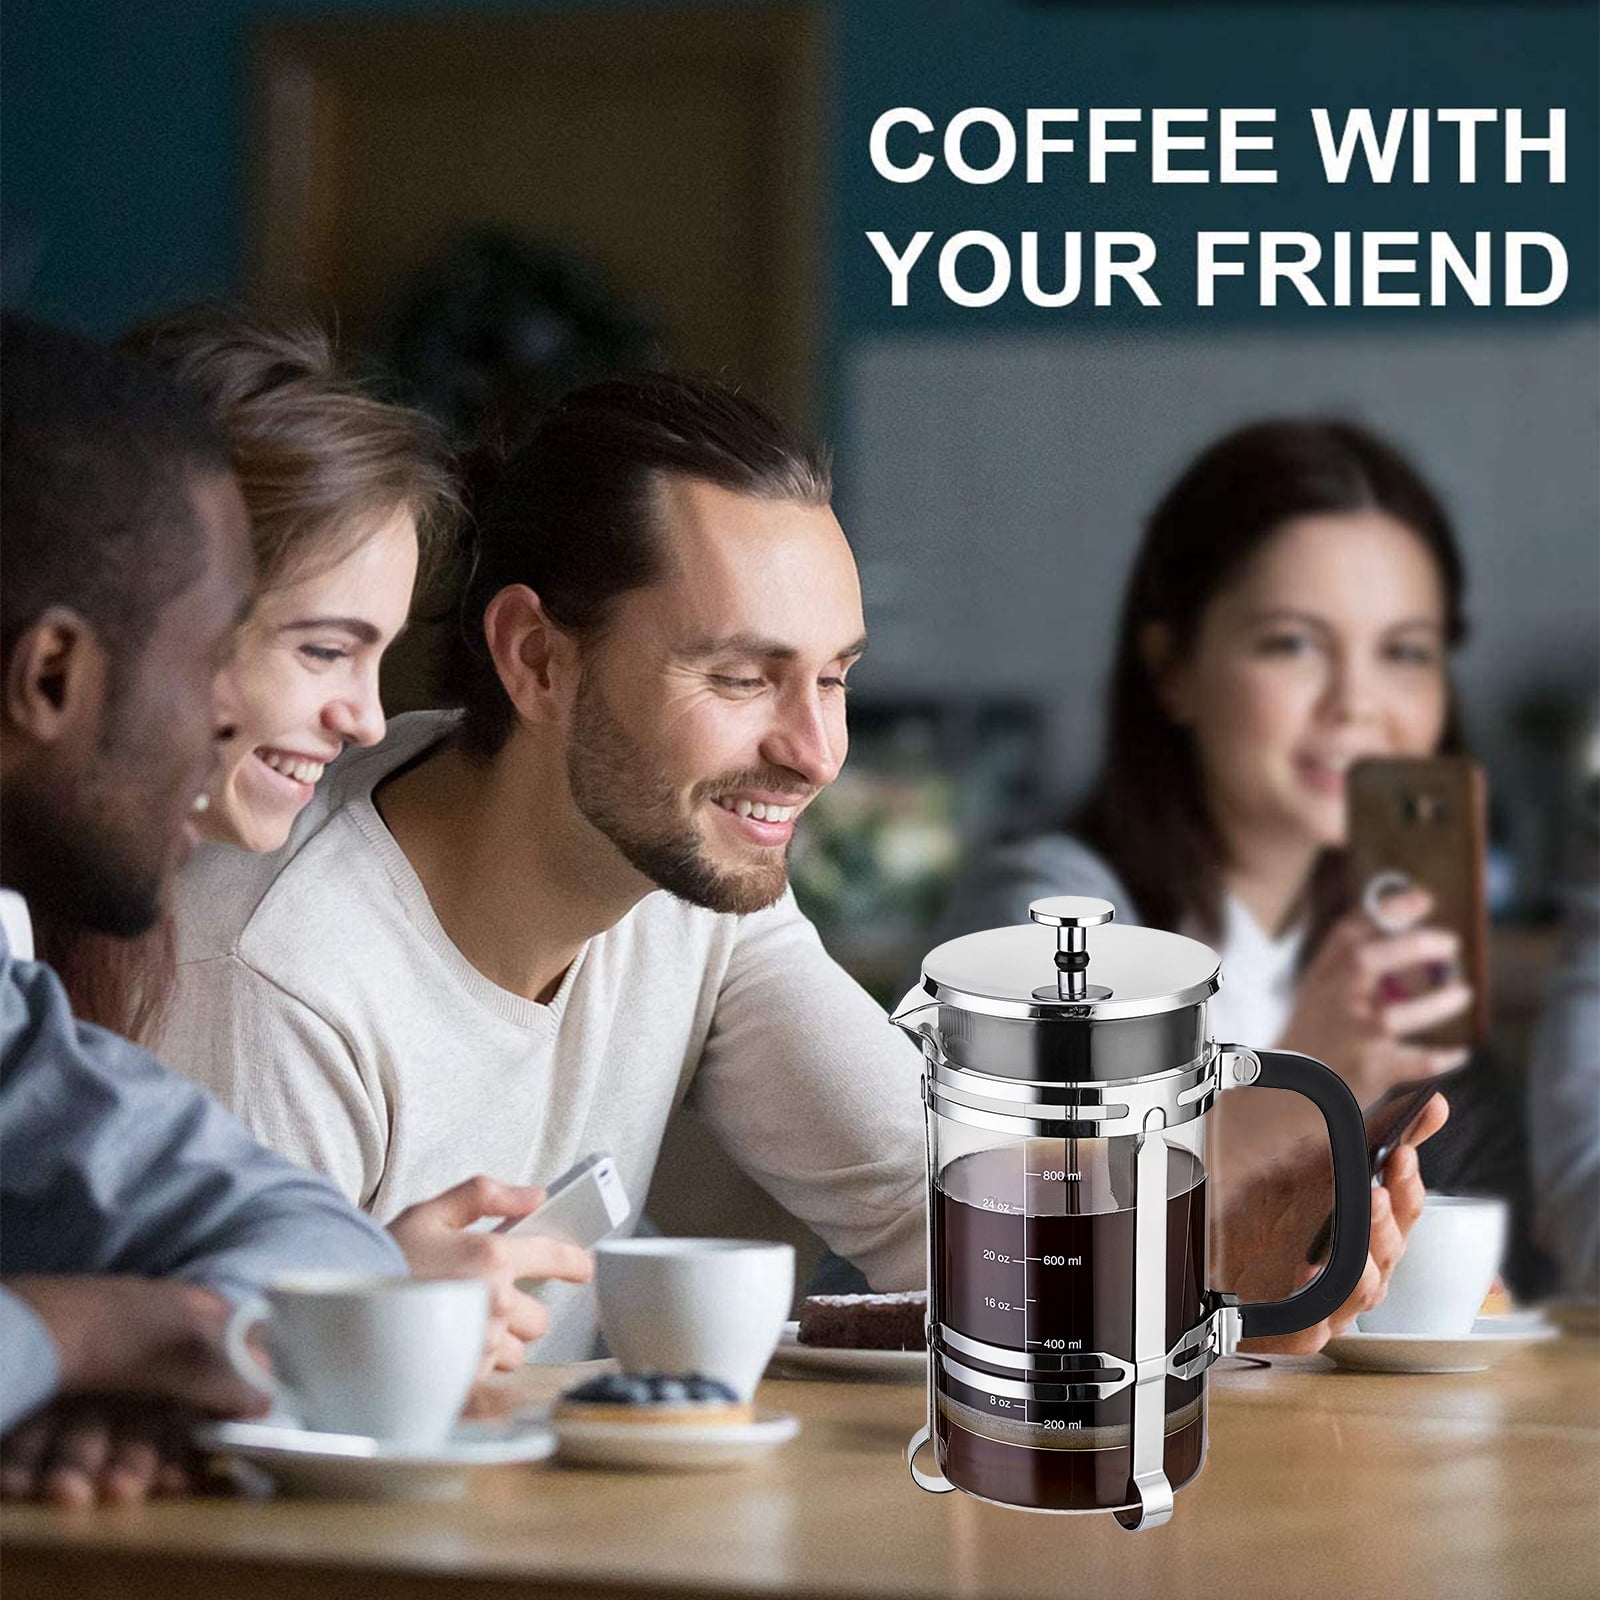 Gracie's Finest French Press Coffee Maker - Large 34 oz. Glass Coffee Pot Carafe with Stainless Steel Filter - French Press Coffee at Home or Office